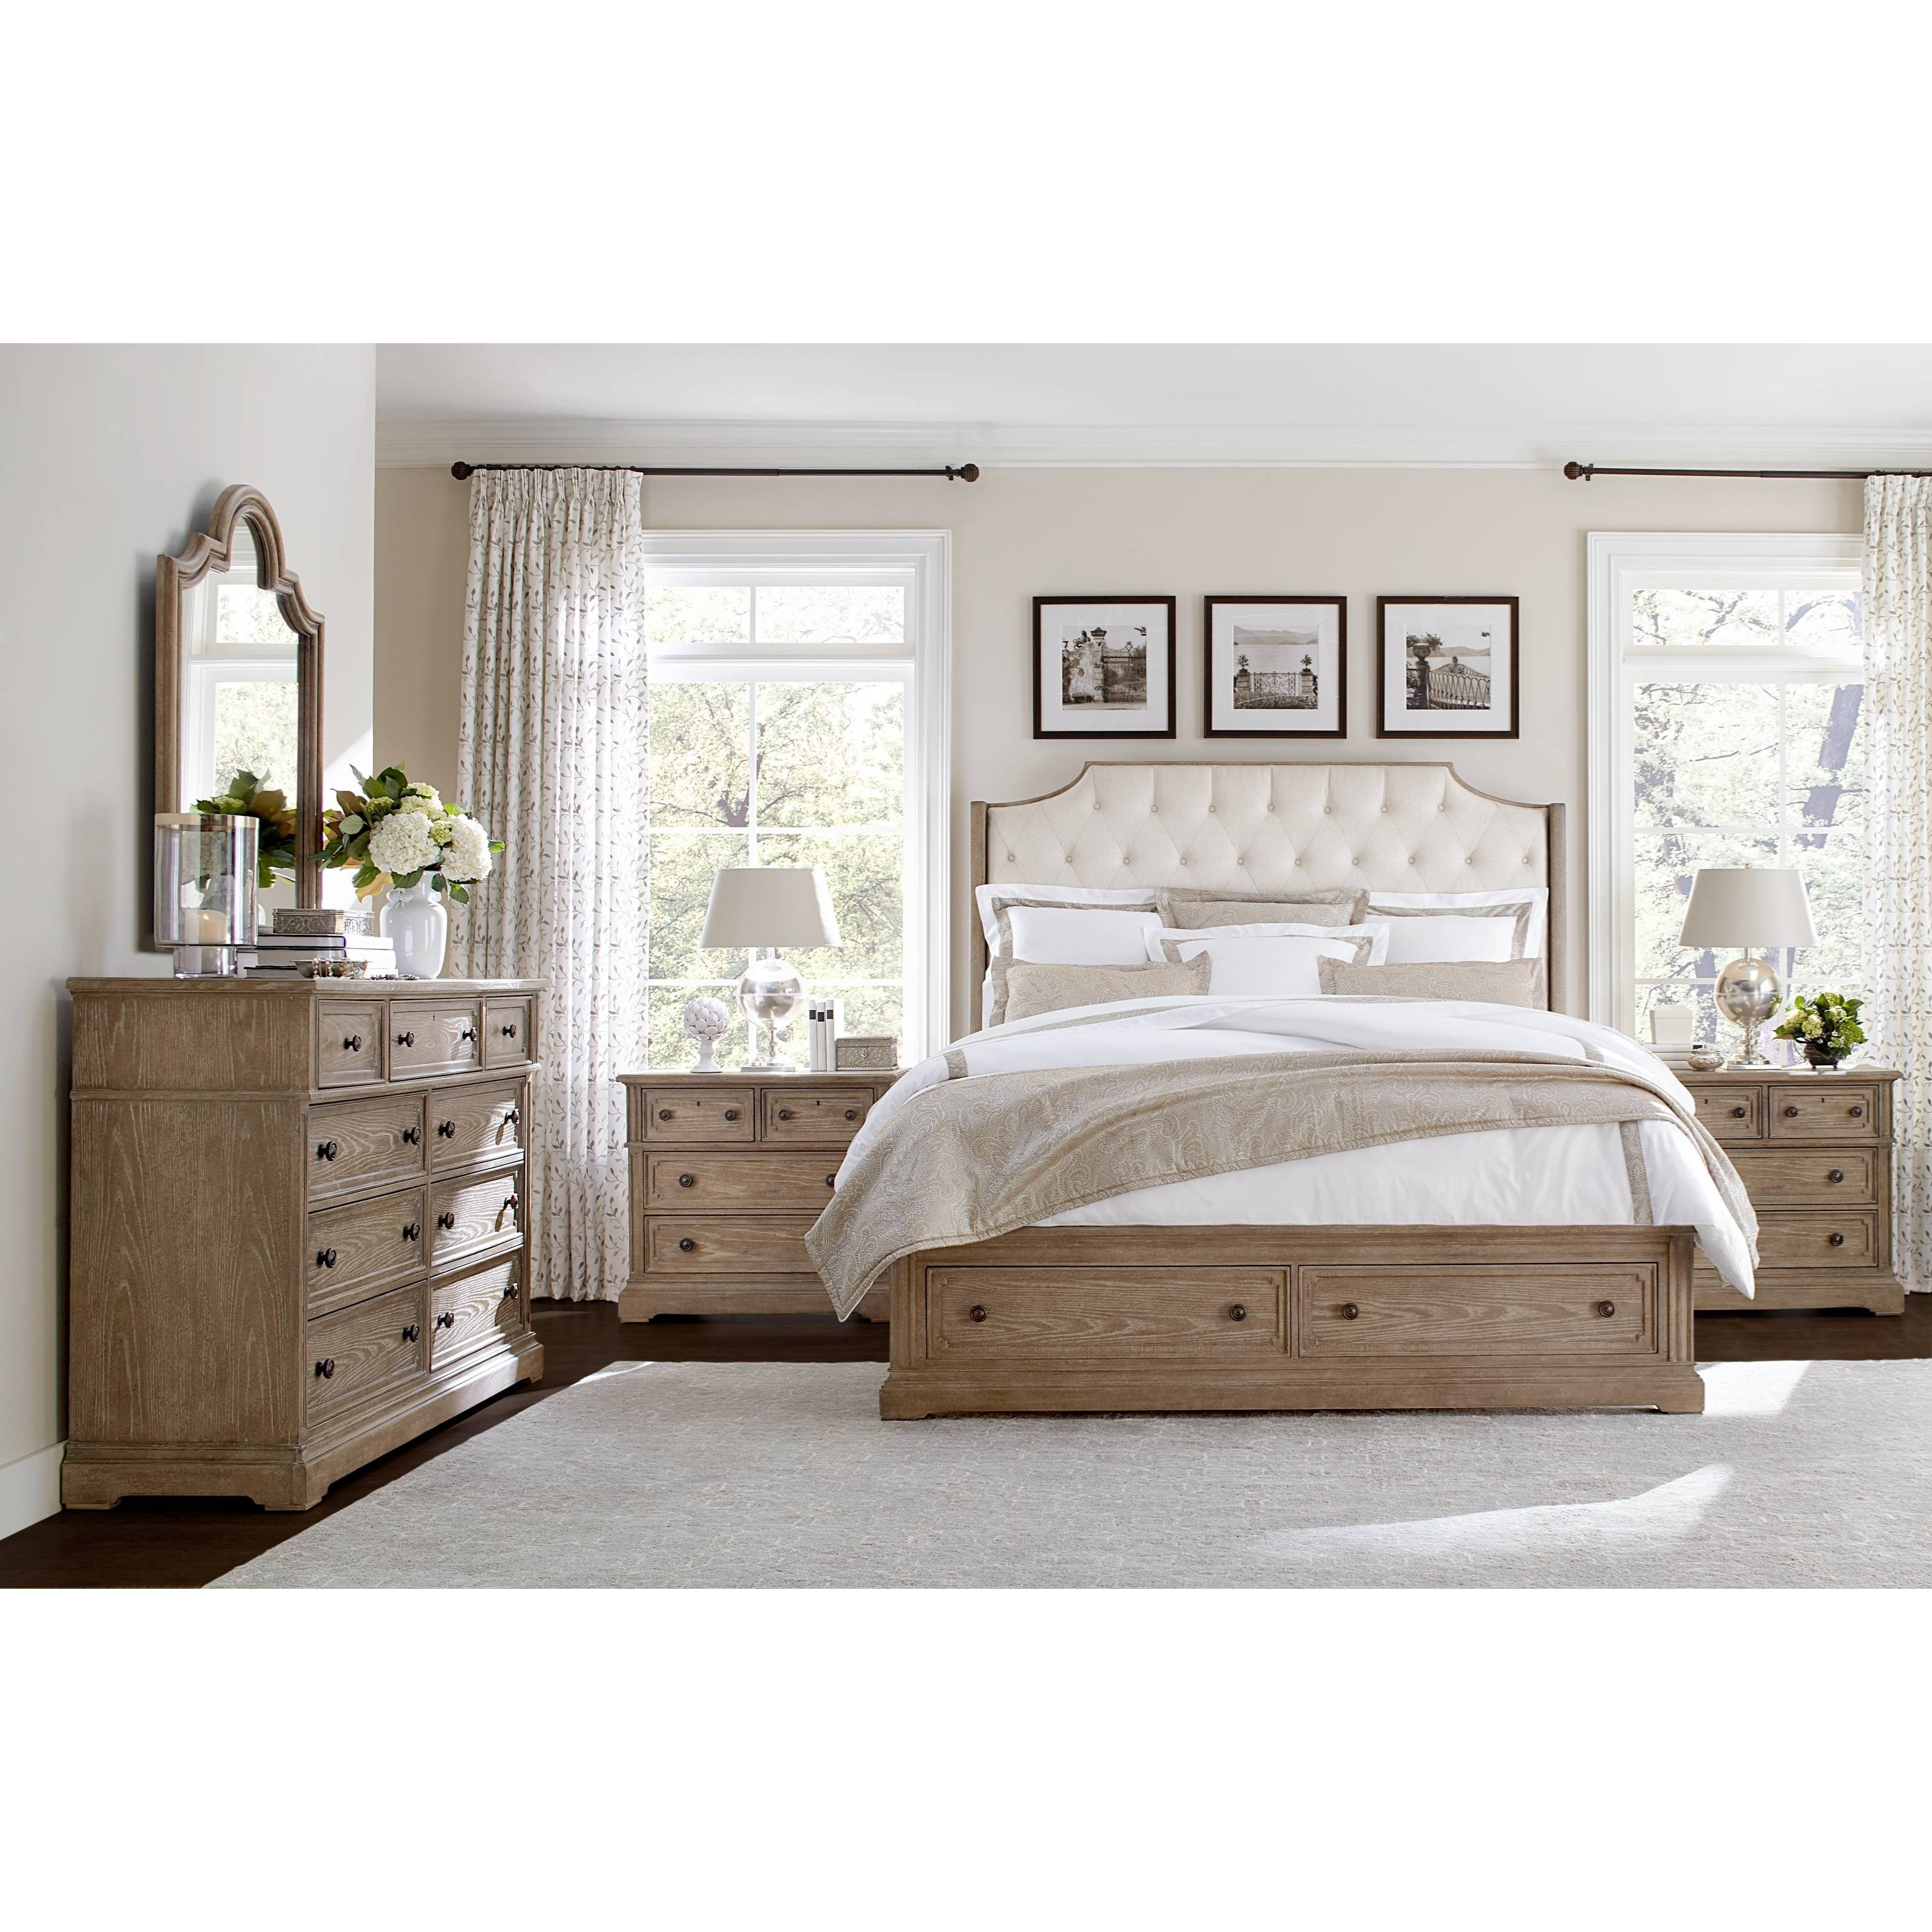 Wethersfield Estate King Bedroom Group Stanley Furniture At Dunk Bright Furniture pertaining to dimensions 3102 X 3102